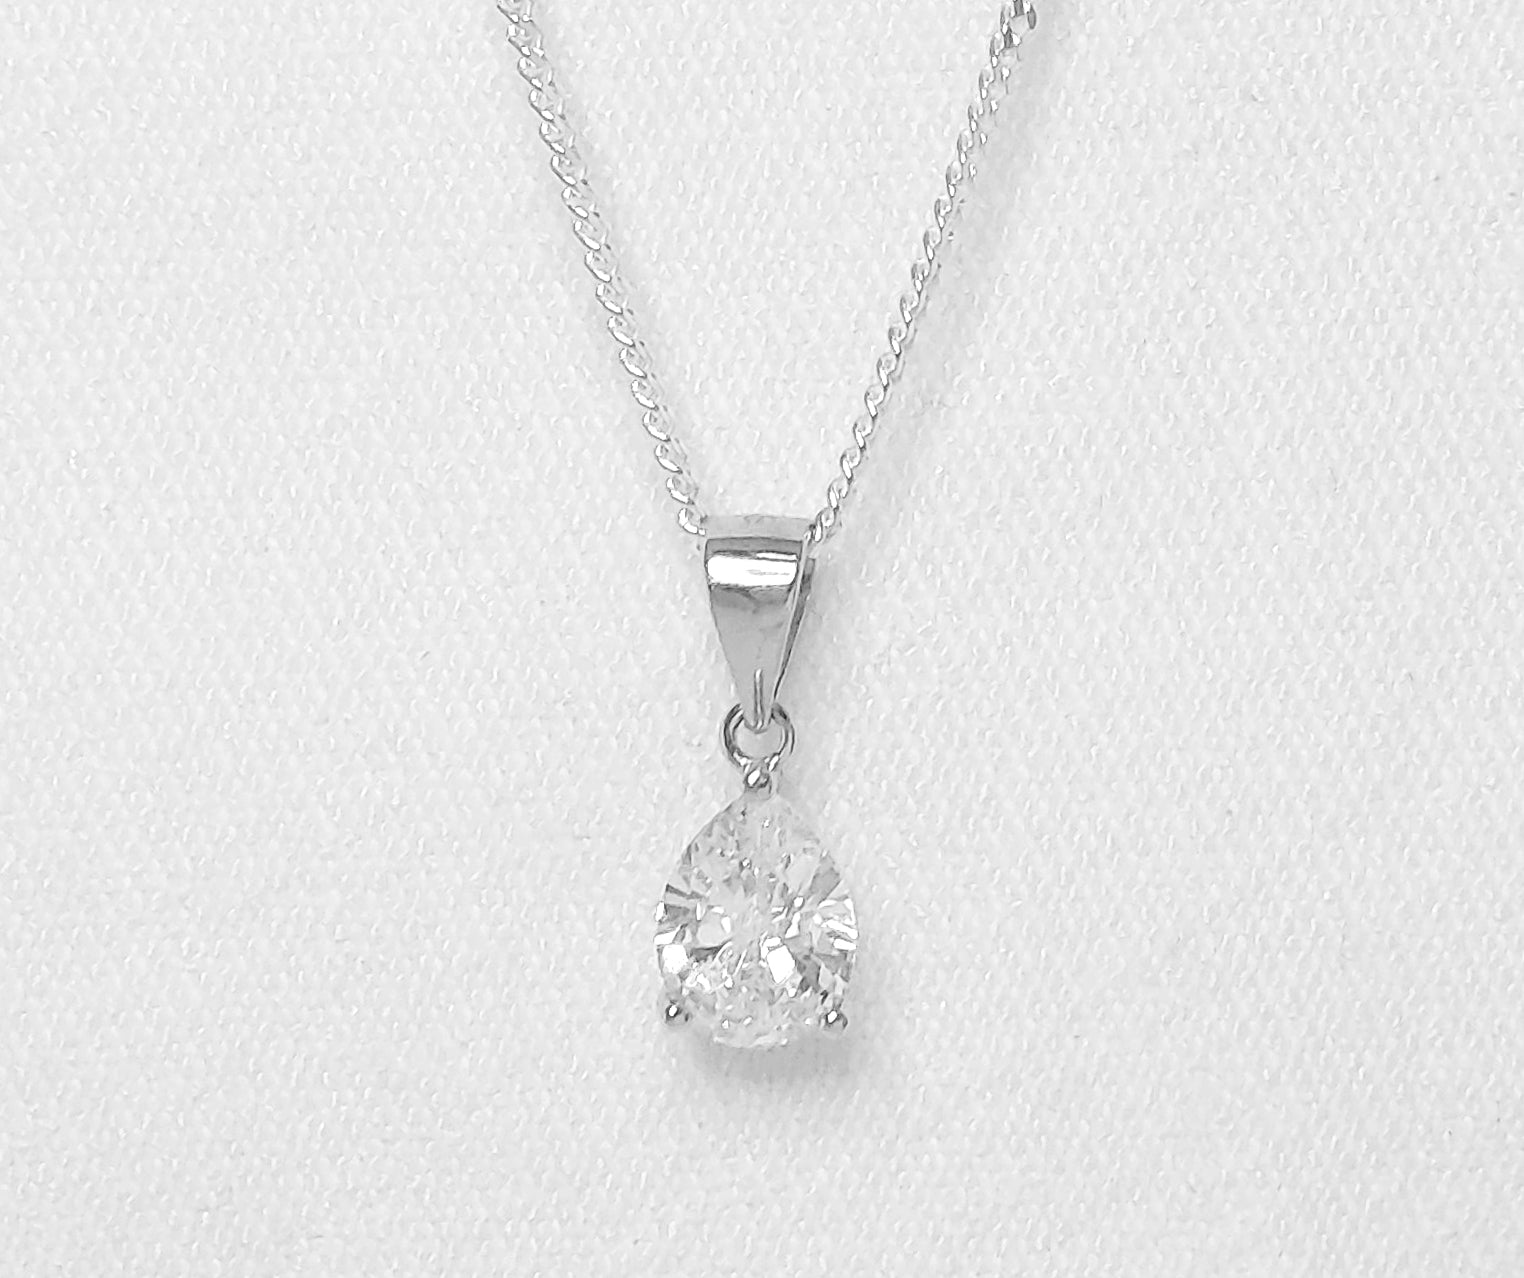 Sterling Silver Teardrop Pendant with Cubic Zirconia stones